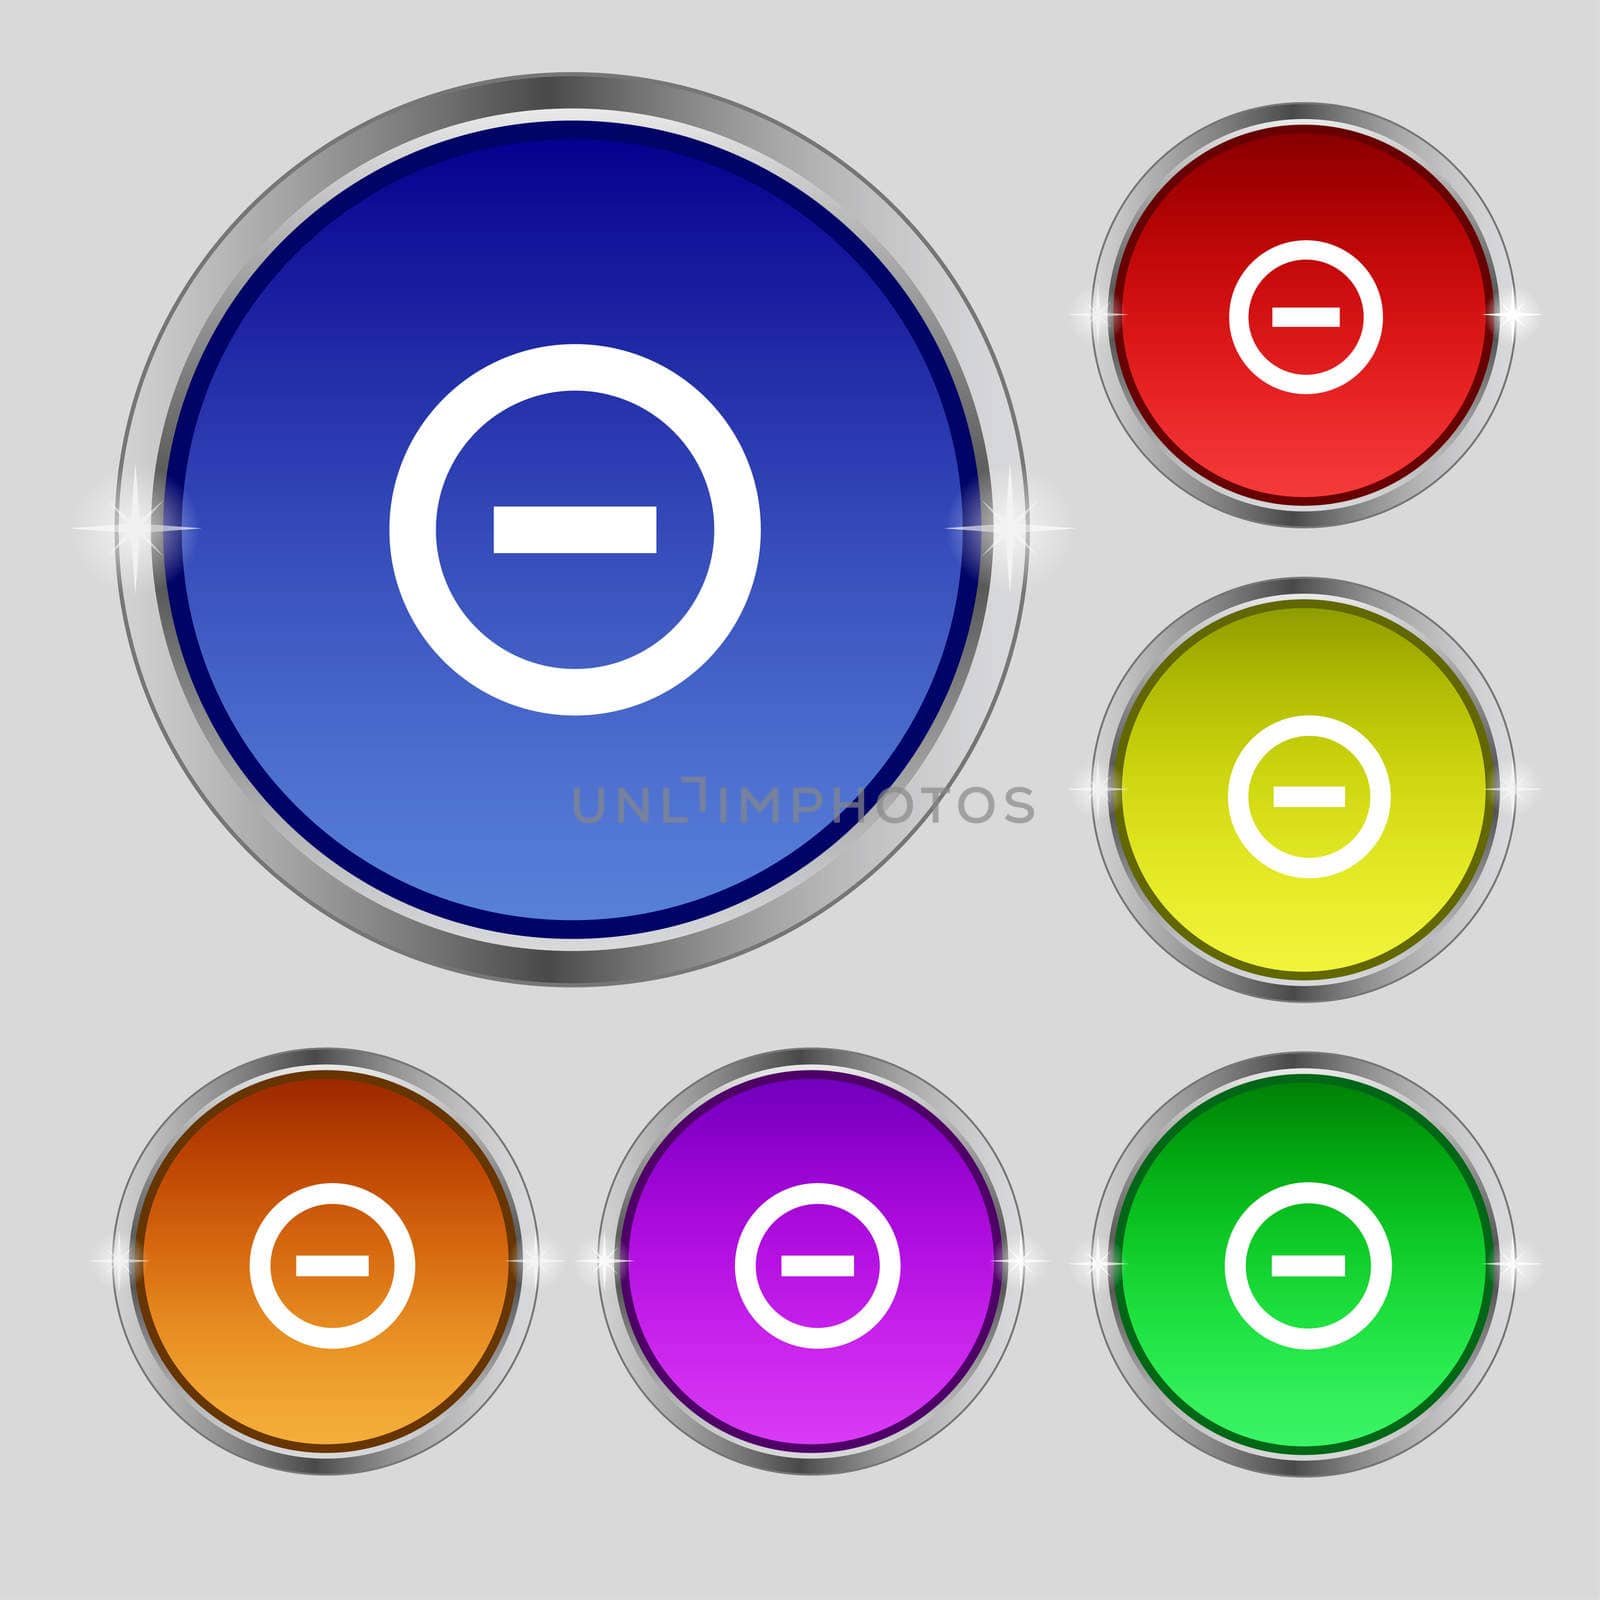 Minus, Negative, zoom, stop icon sign. Round symbol on bright colourful buttons. illustration